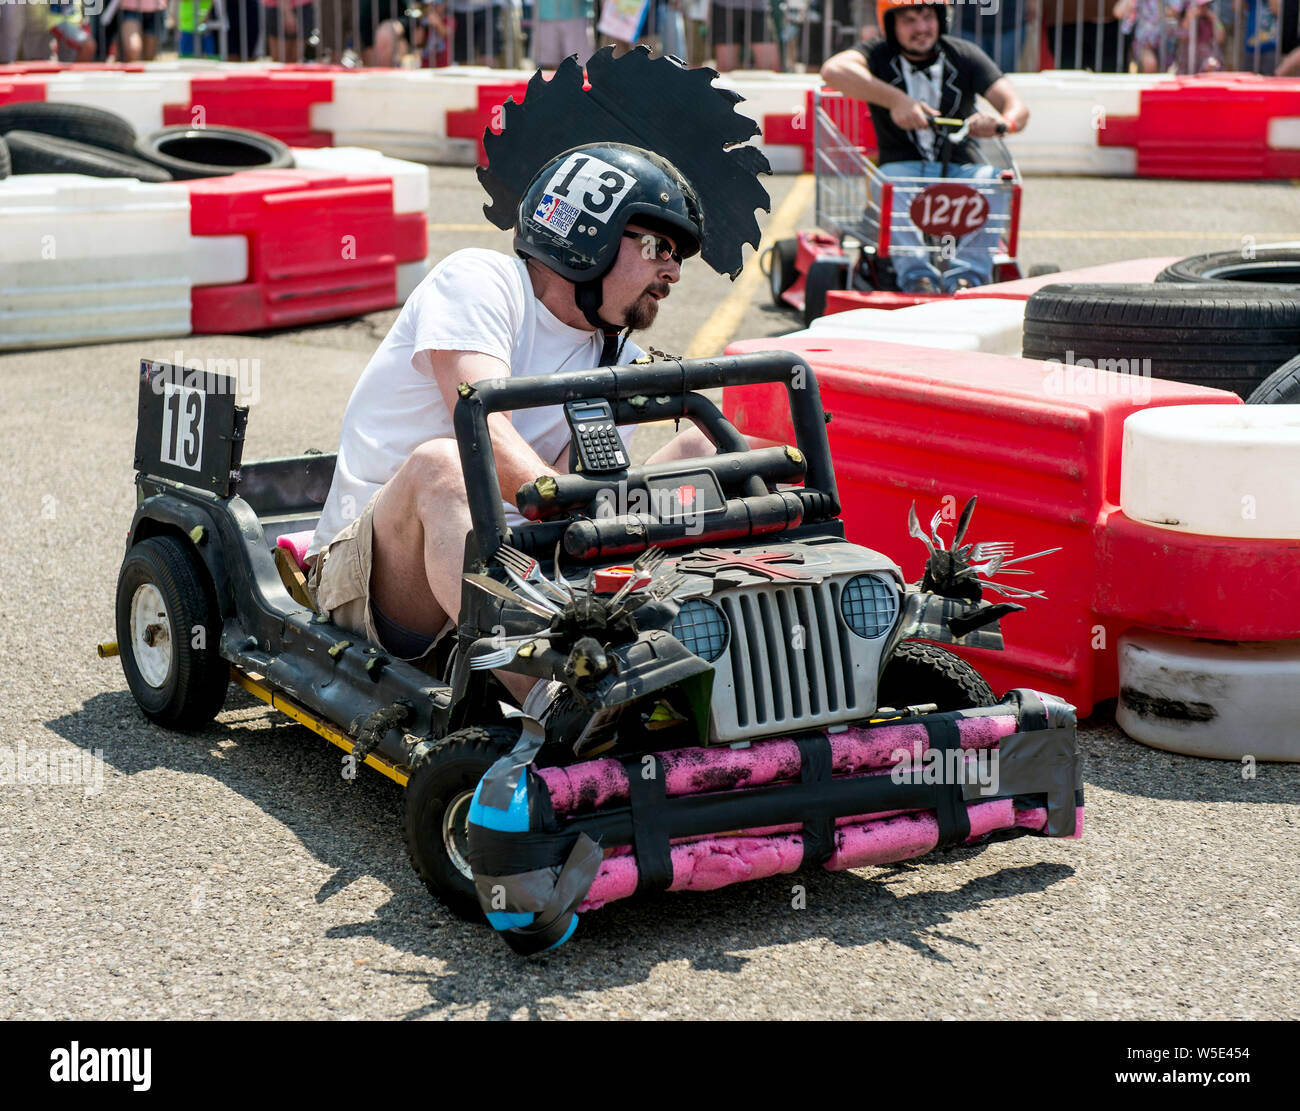 July 28, 2019, Dearborn, Michigan, USA: Track action in the Power Racing Series during the 10th Annual Maker Faire Detroit at the Henry Ford Museum of American Innovation. Maker Faire is a gathering of tech enthusiasts, tinkerers, engineers and science club members who gather to show and share knowledge about what they've made. Credit: Brian Cahn/ZUMA Wire/Alamy Live News Stock Photo